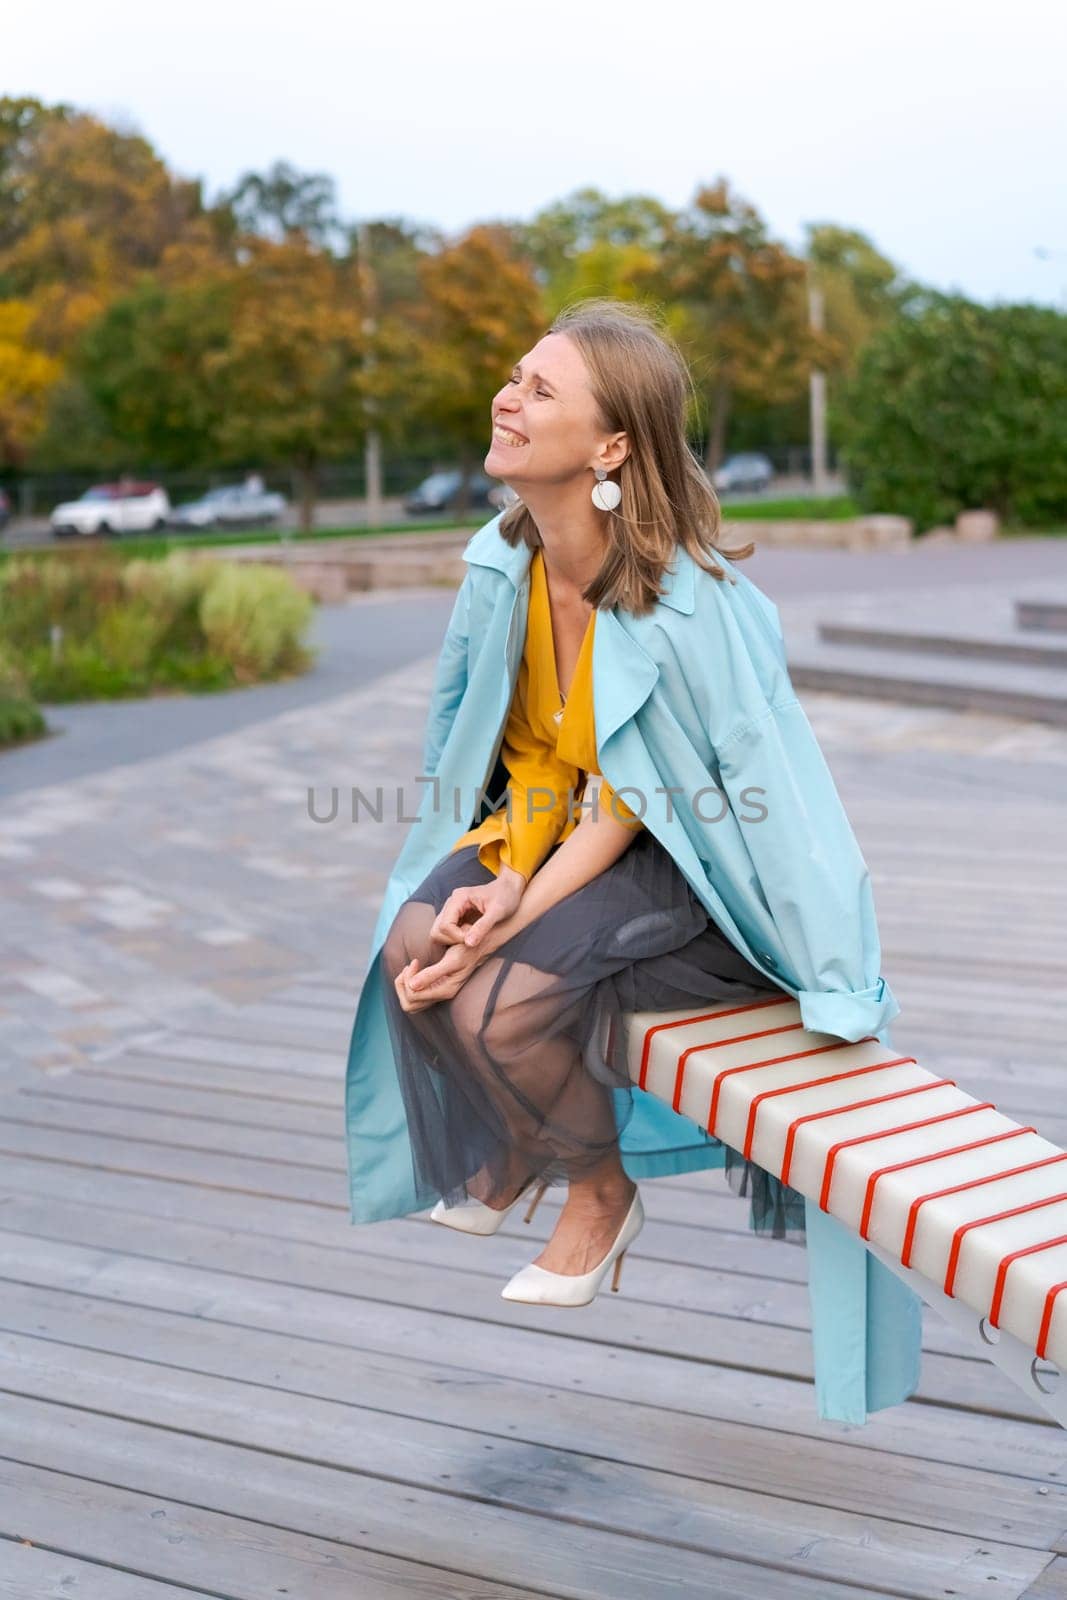 Happy woman swinging on swing in city park, wearing yellow dress and blue coat, the concept of freedom from worries and problems